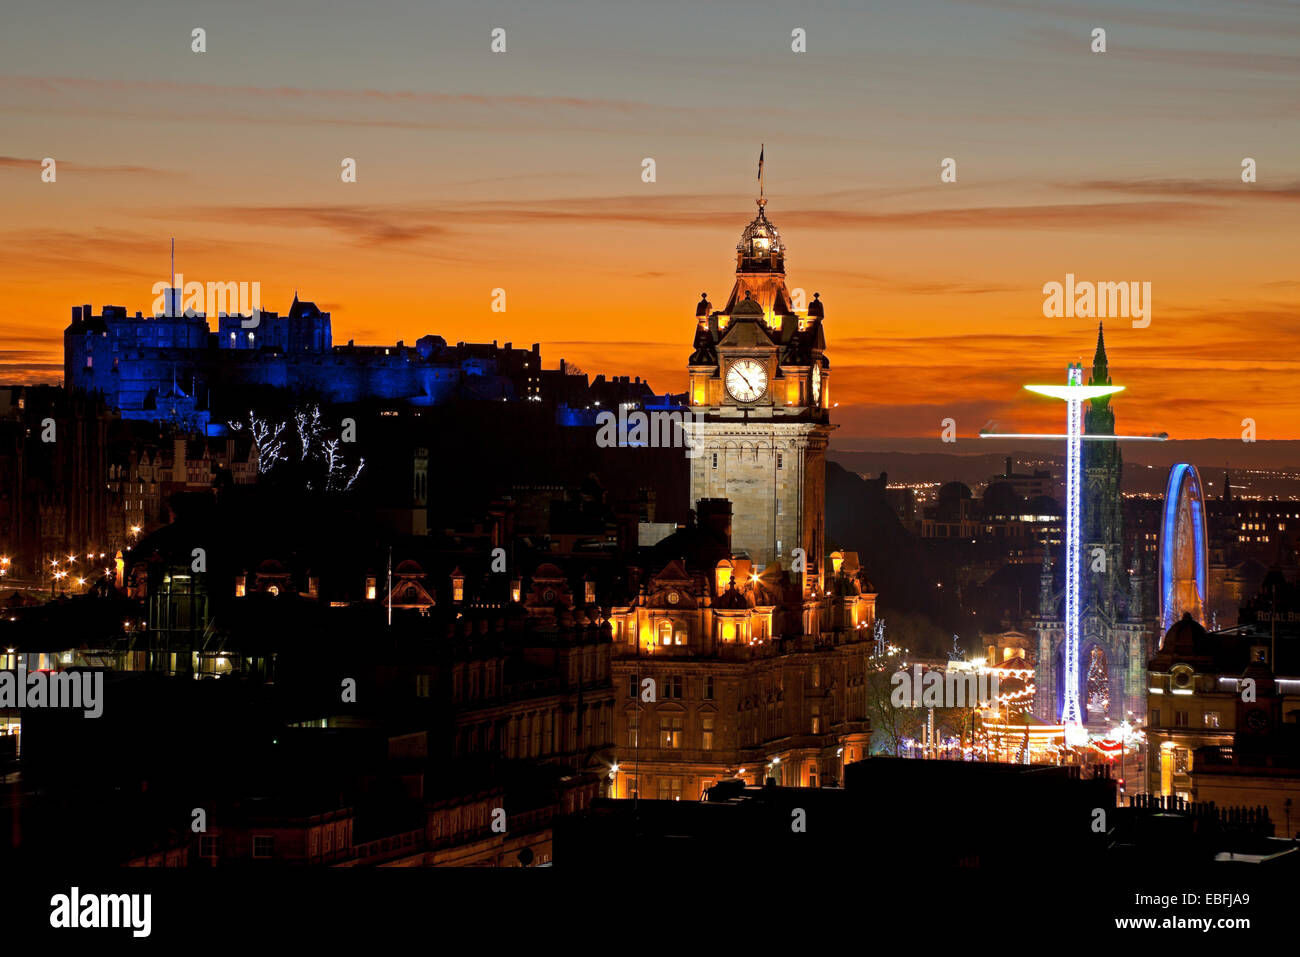 Edinburgh, Scotland, UK. 30th November, 2014. Edinburgh Castle and the city viewed from Calton Hill at sunset the castle is illuminated with blue lighting during St Andrew's Day celebrations, also showing the Big Wheel and Star Flyer rides situated beside the Scott Monument in Princes Street Gardens East. Stock Photo